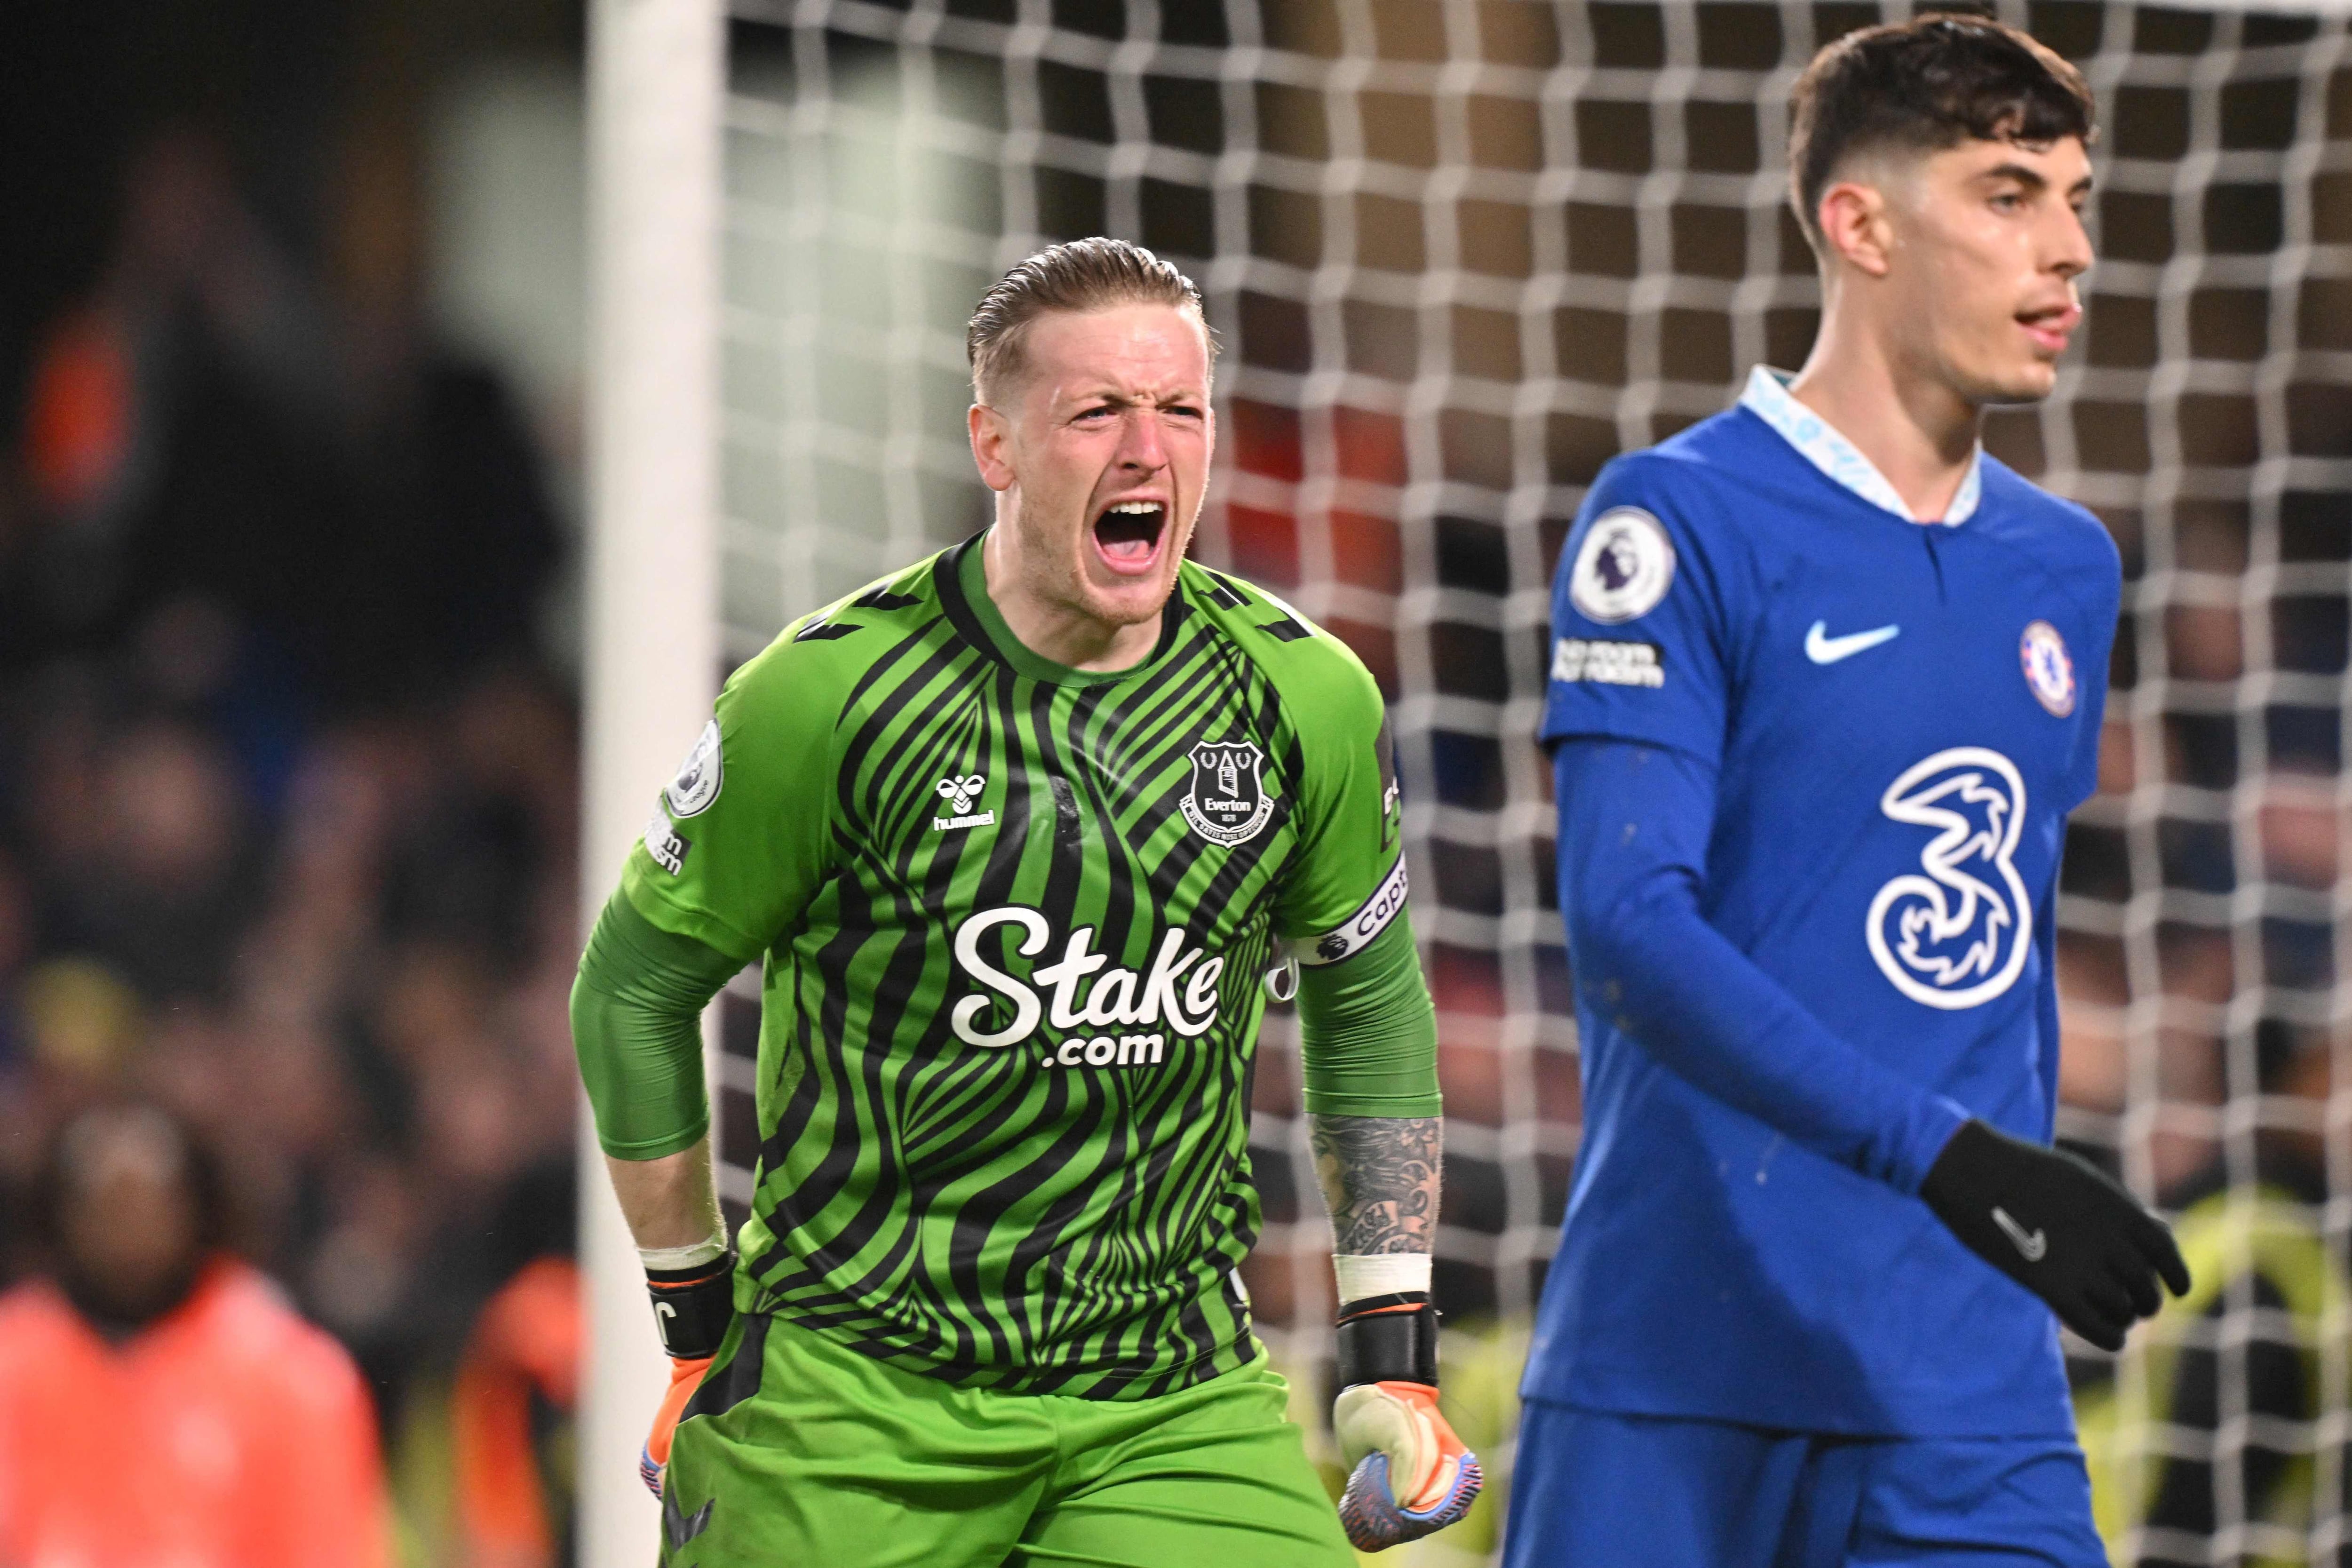 Everton's English goalkeeper Jordan Pickford (L) celebrates behind Chelsea's German midfielder Kai Havertz at the end of the English Premier League football match between Chelsea and Everton at Stamford Bridge in London on March 18, 2023. - Chelsea and Everton equalised 2 - 2. (Photo by Glyn KIRK / AFP) / RESTRICTED TO EDITORIAL USE. No use with unauthorized audio, video, data, fixture lists, club/league logos or 'live' services. Online in-match use limited to 120 images. An additional 40 images may be used in extra time. No video emulation. Social media in-match use limited to 120 images. An additional 40 images may be used in extra time. No use in betting publications, games or single club/league/player publications. / 